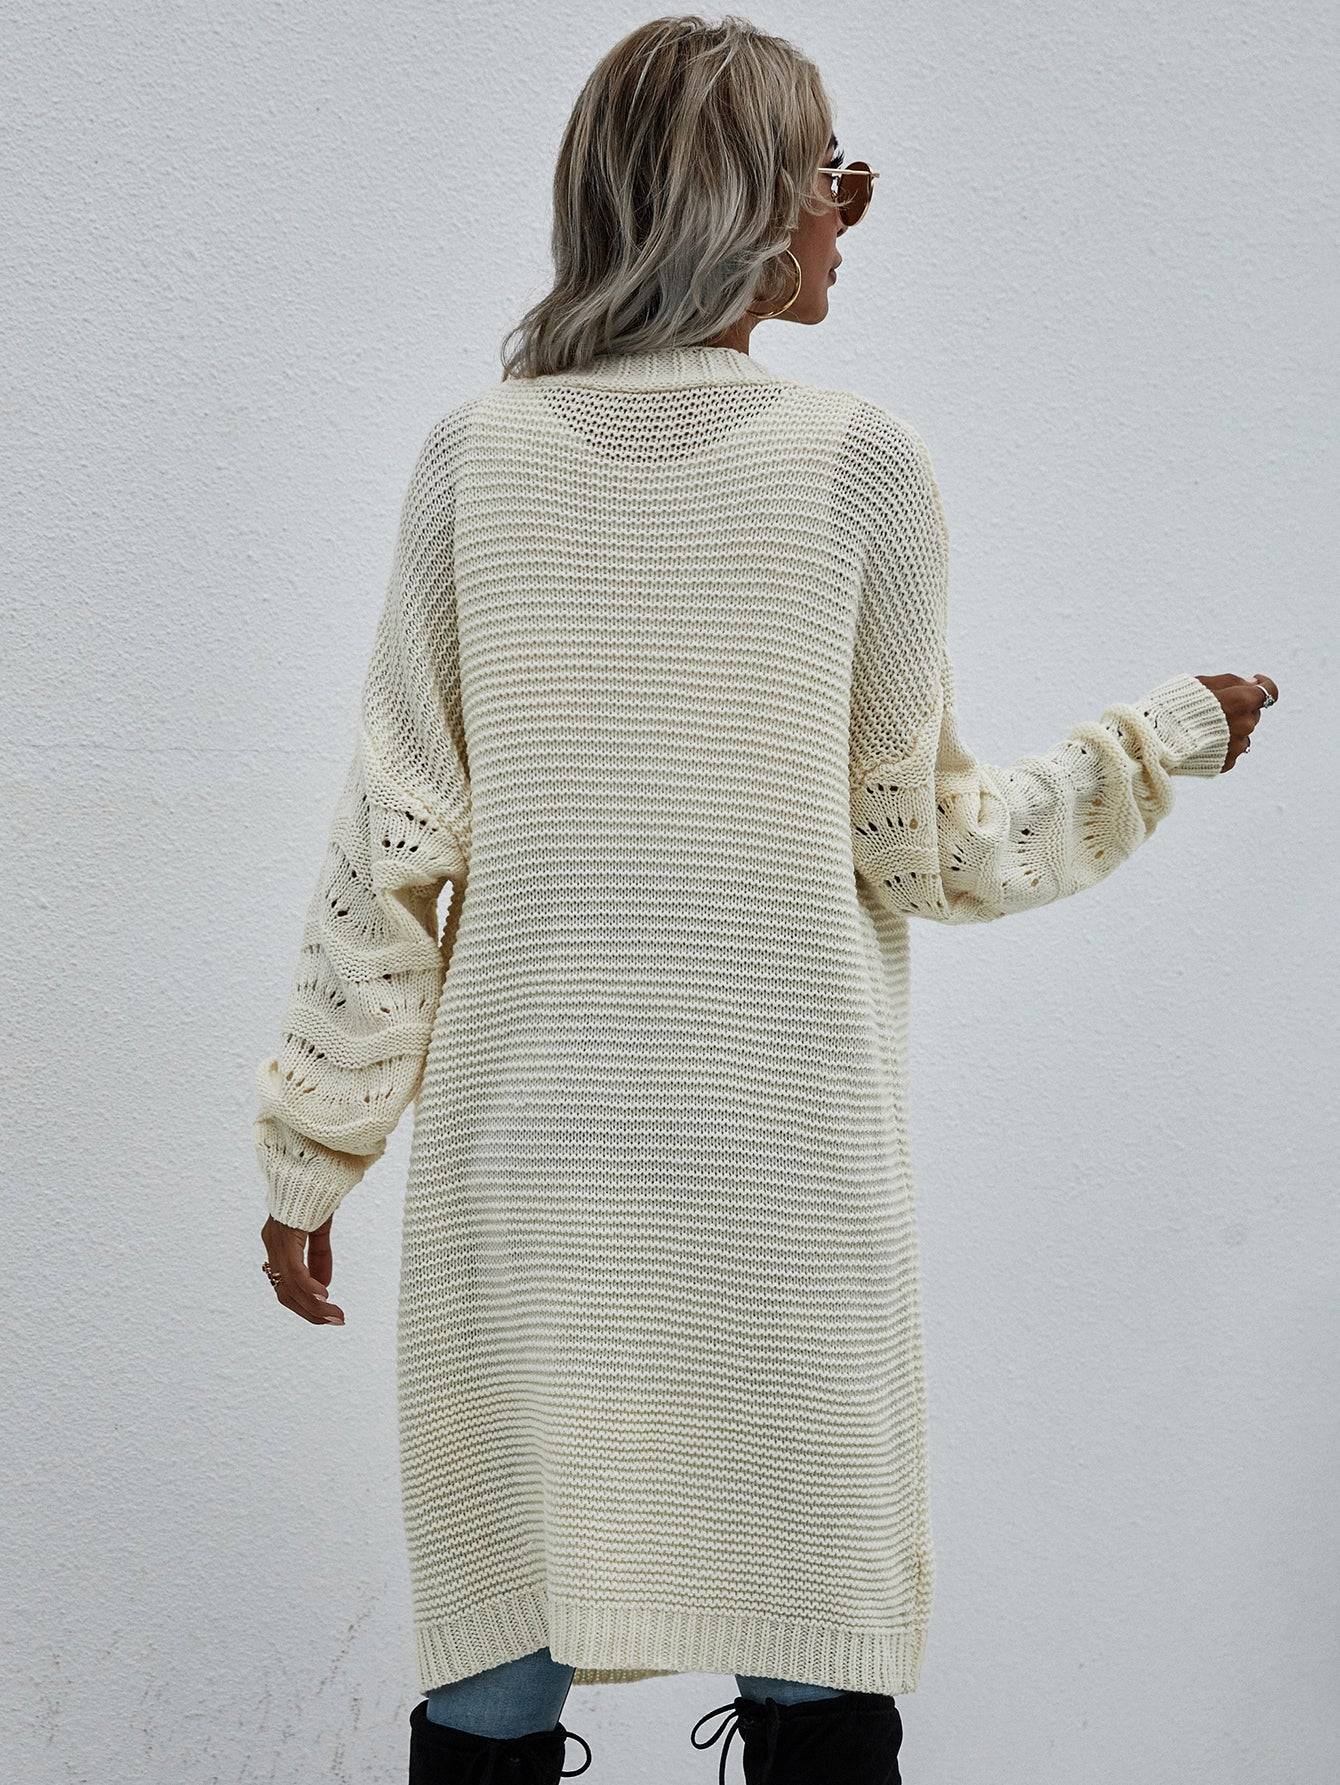 Back View, Side View, Open Front Duster Cardigan In Apricot